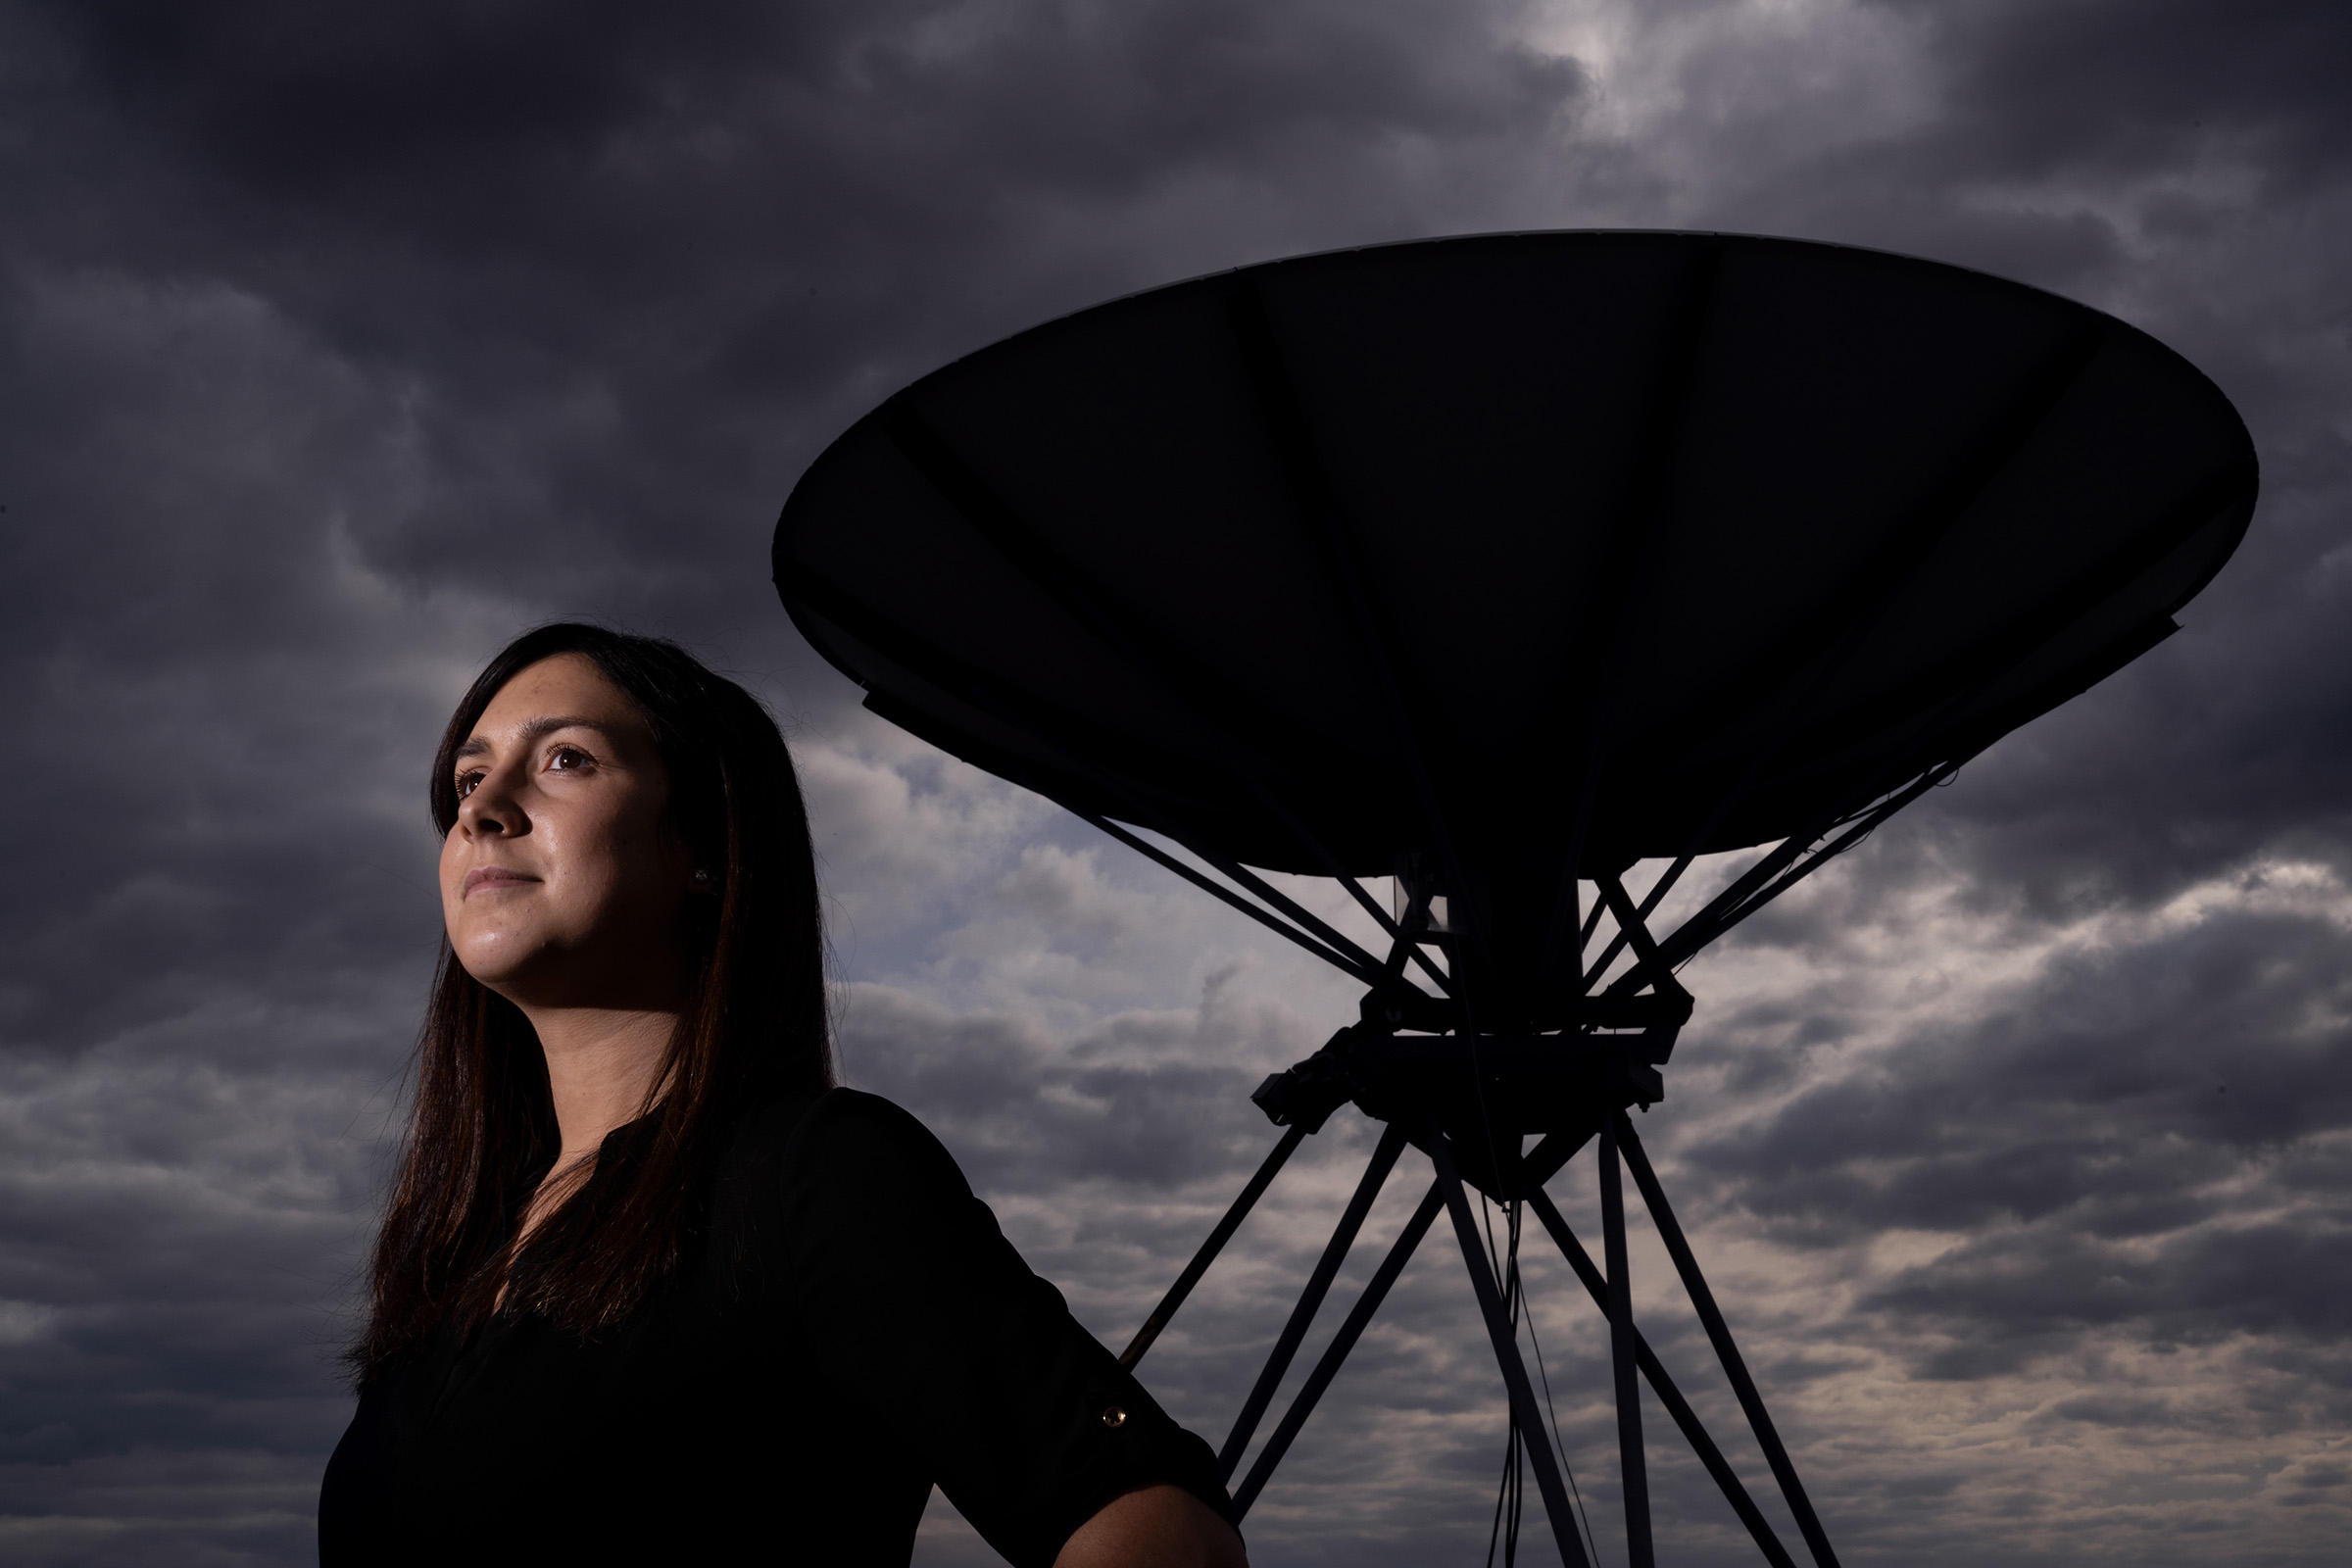 UI Grad Emily Silich looks to the sky while standing in front of a massive satellite dish